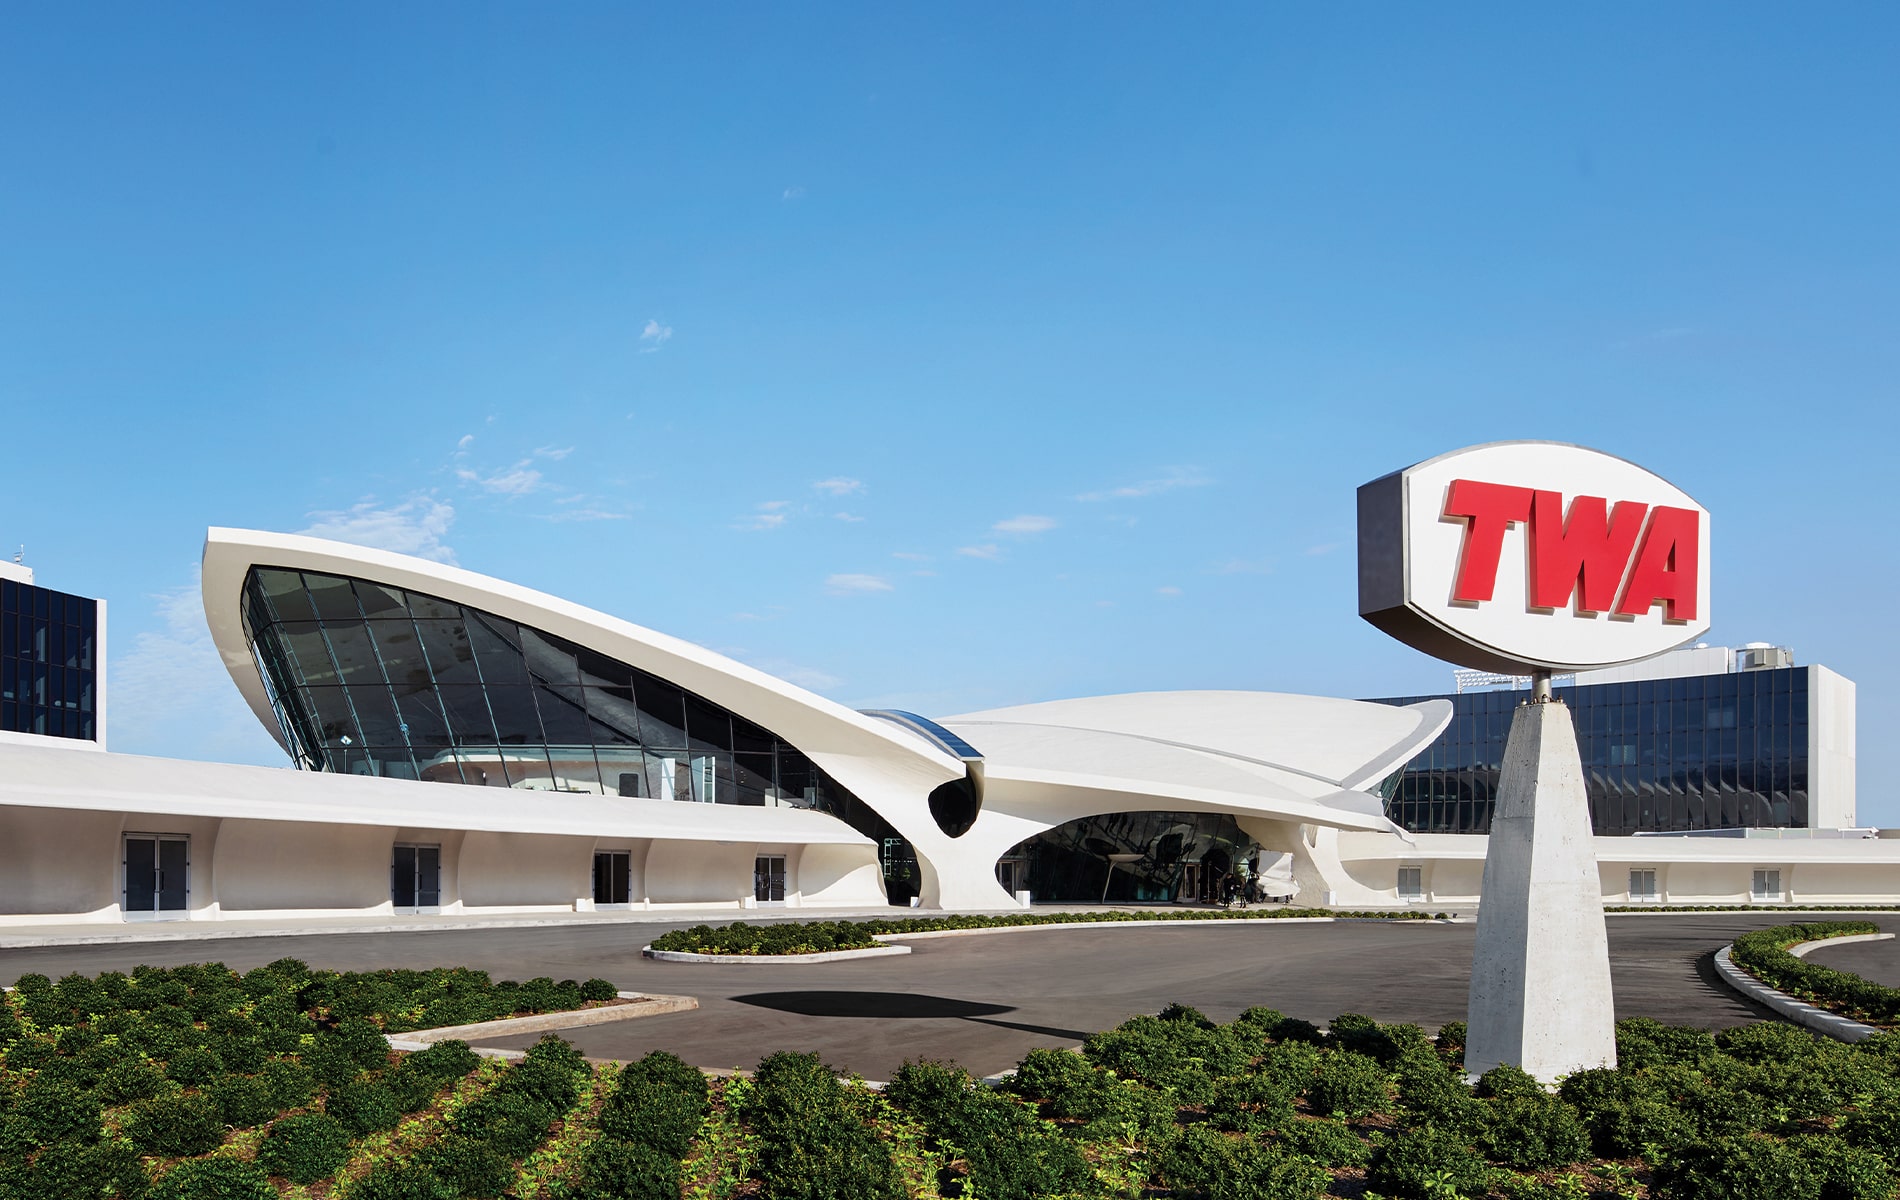 TWA Hotel Celebrates the Golden Age of Air Travel